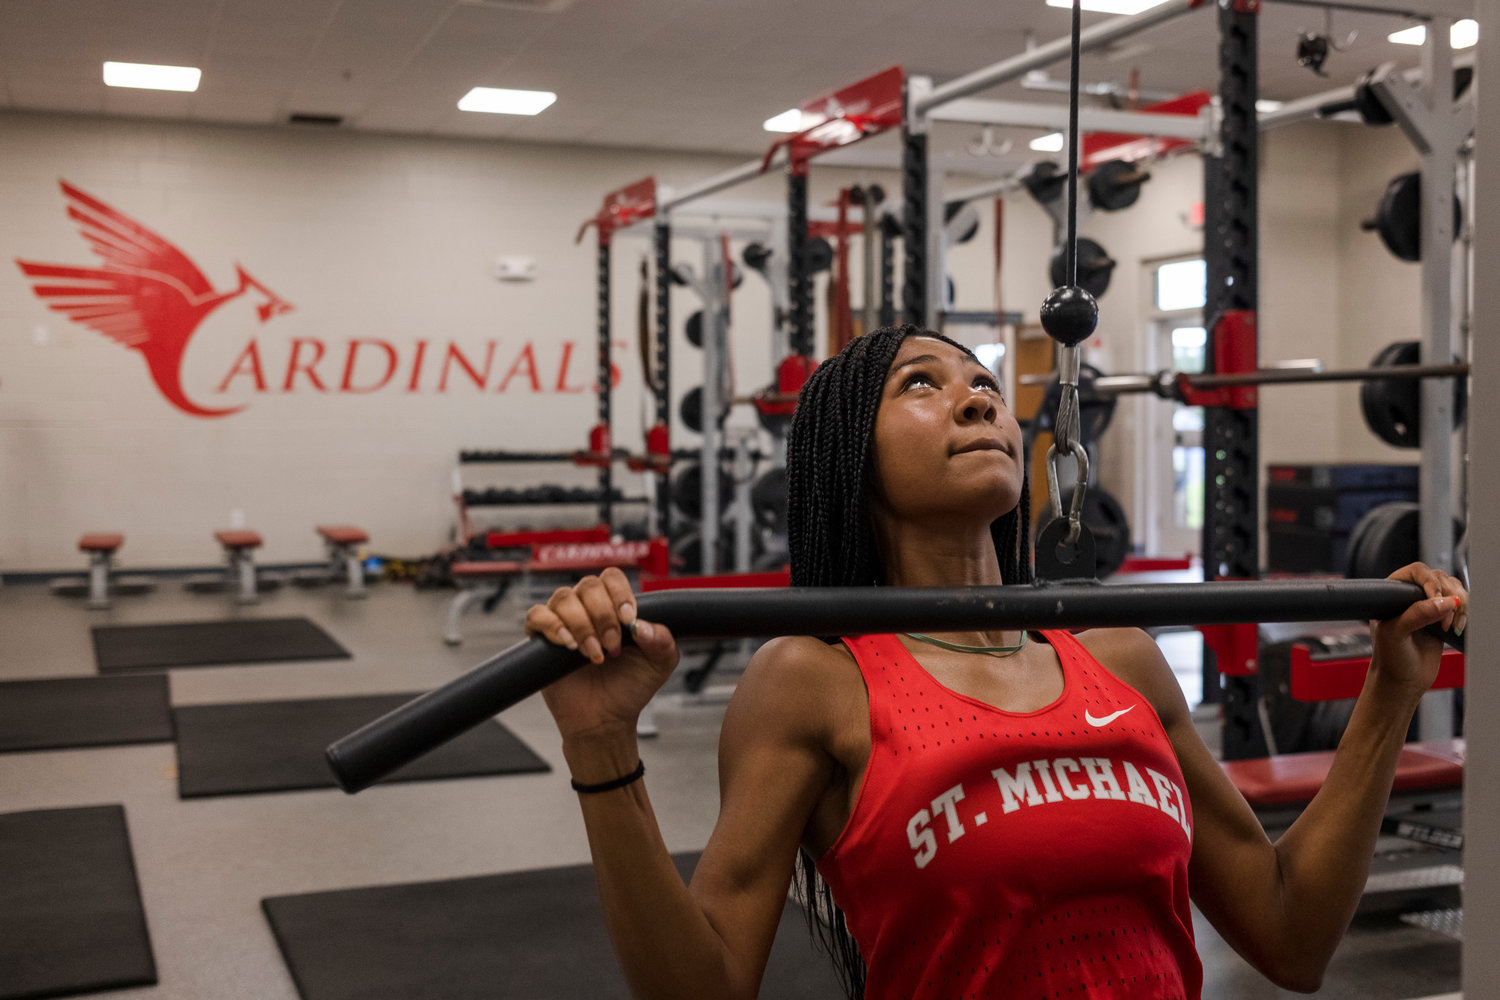 Cardinal senior Tia Acker works out in the St. Michael Catholic High School weight room Aug. 5. She was just a few weeks away from jogging again after she tore her ACL earlier this summer.